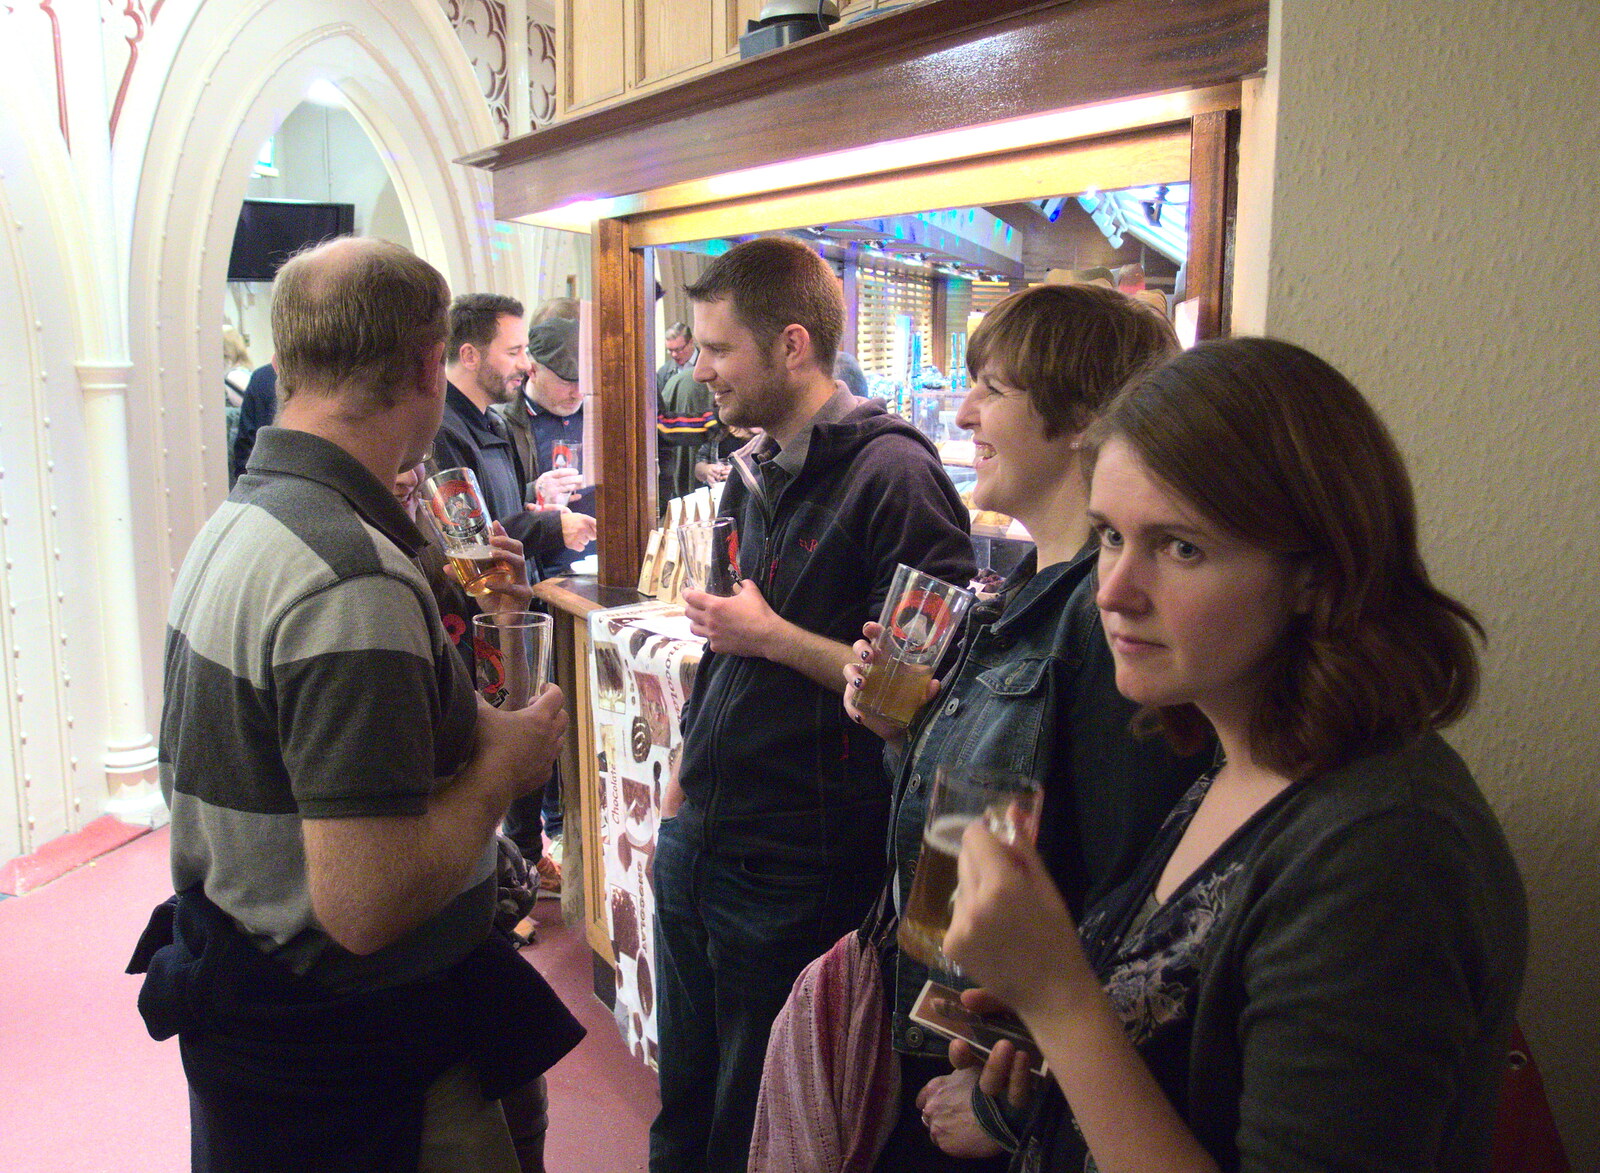 The gang hang around in Blackfriar's Hall from The 38th Norwich Beer Festival, Norwich, Norfolk - 28th October 2015